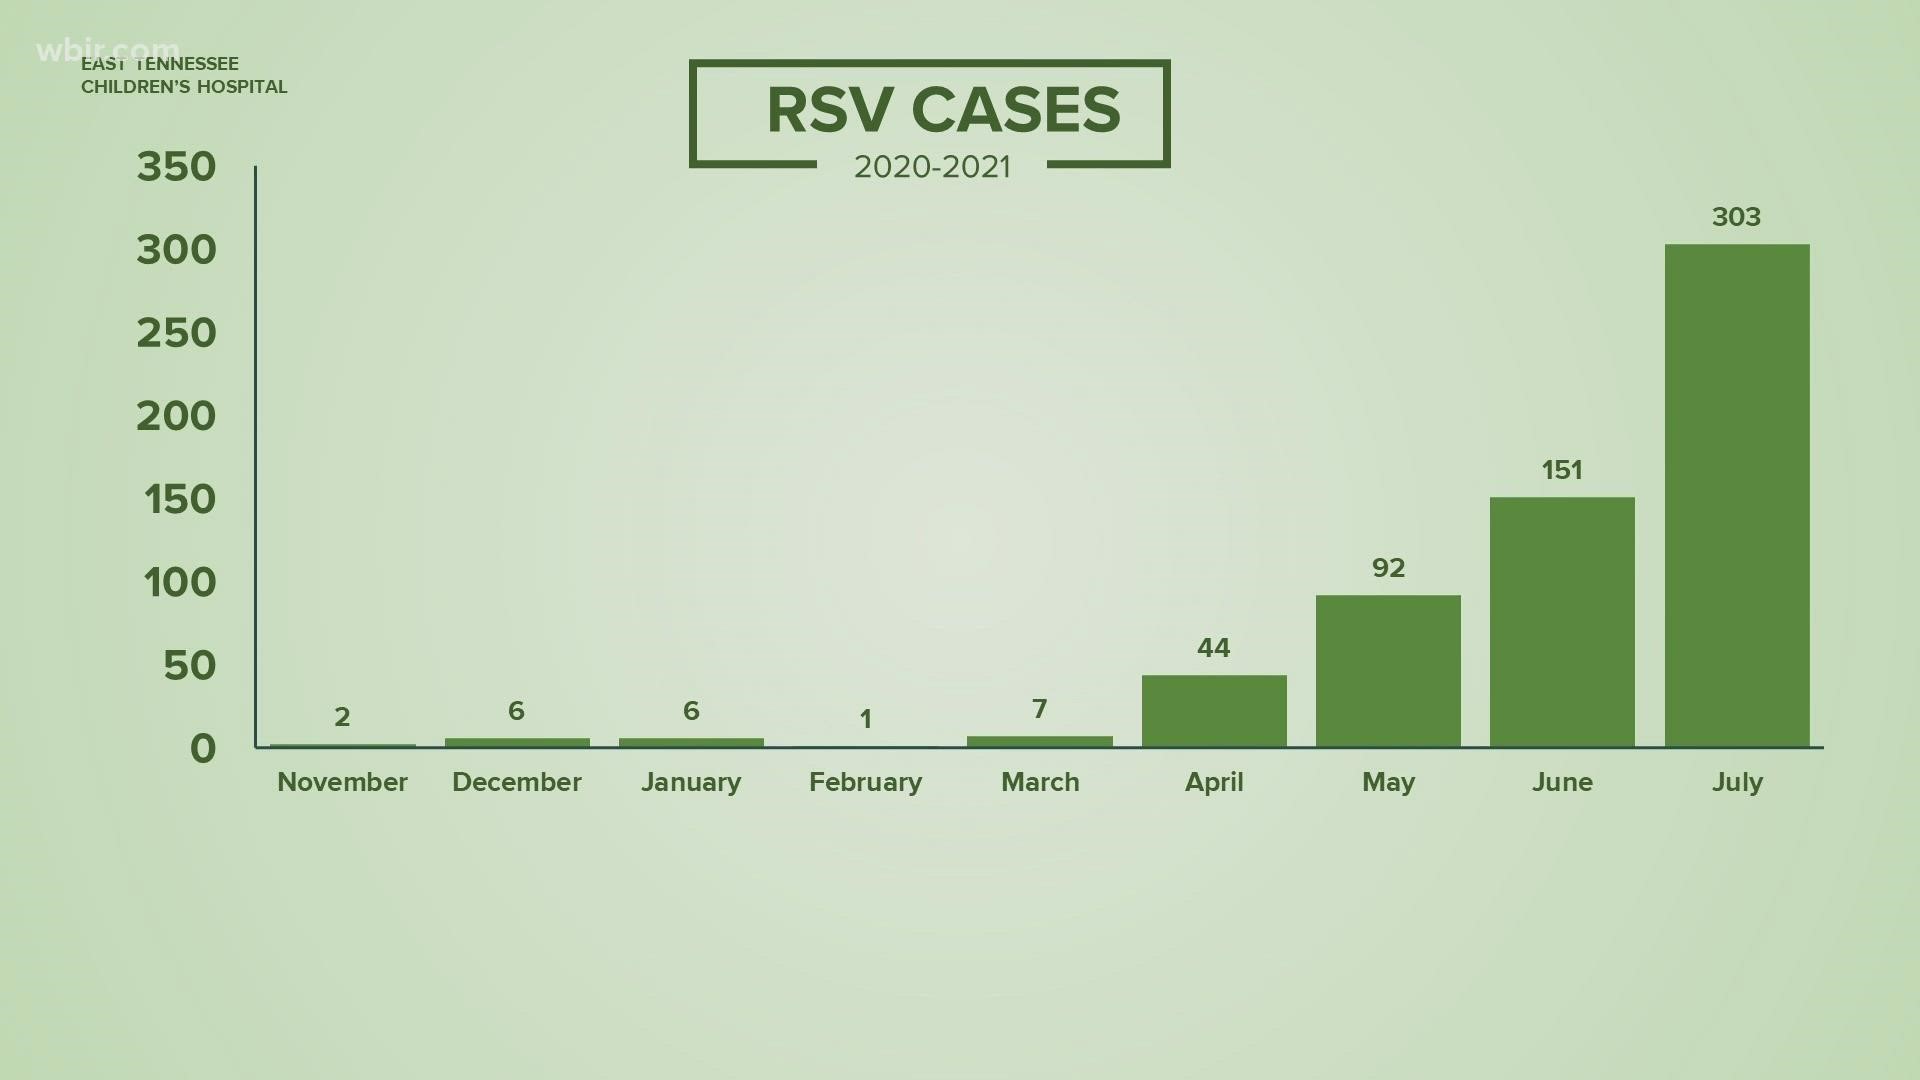 The number of RSV cases in July doubled the number of reported cases just the month before.